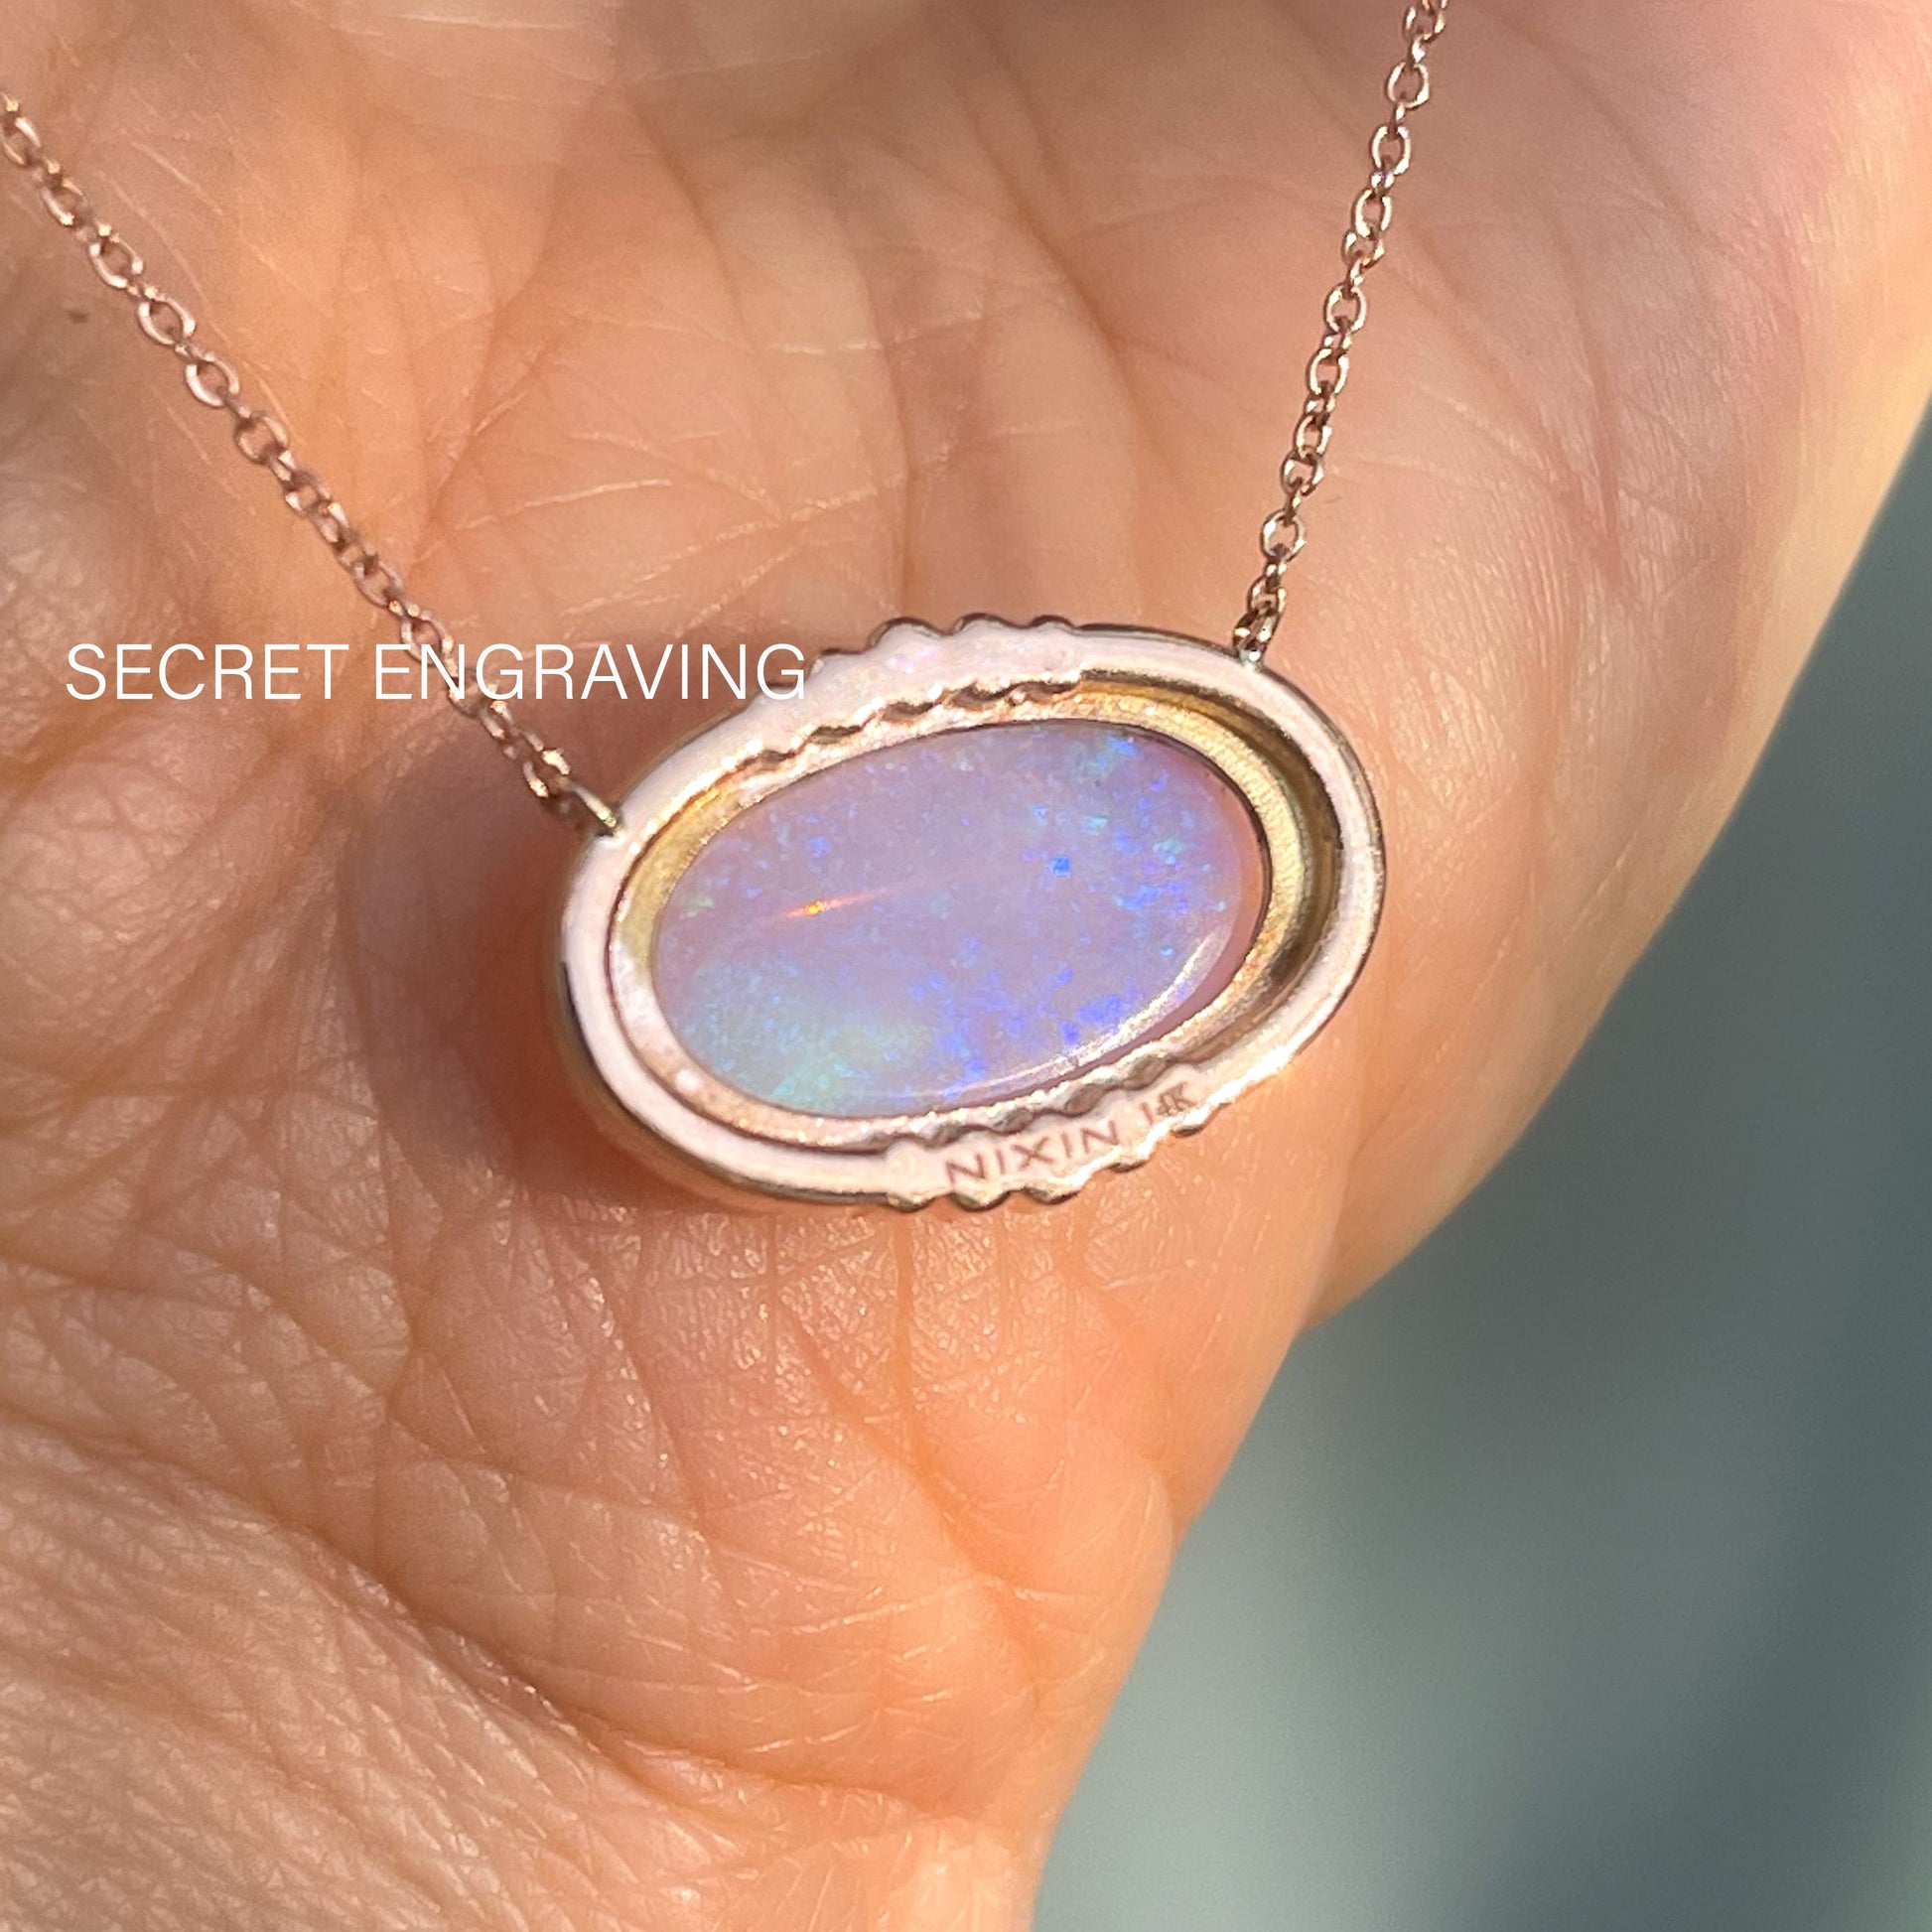  The back of an Australian Opal Necklace by NIXIN Jewelry showing the location of the secret engraving.